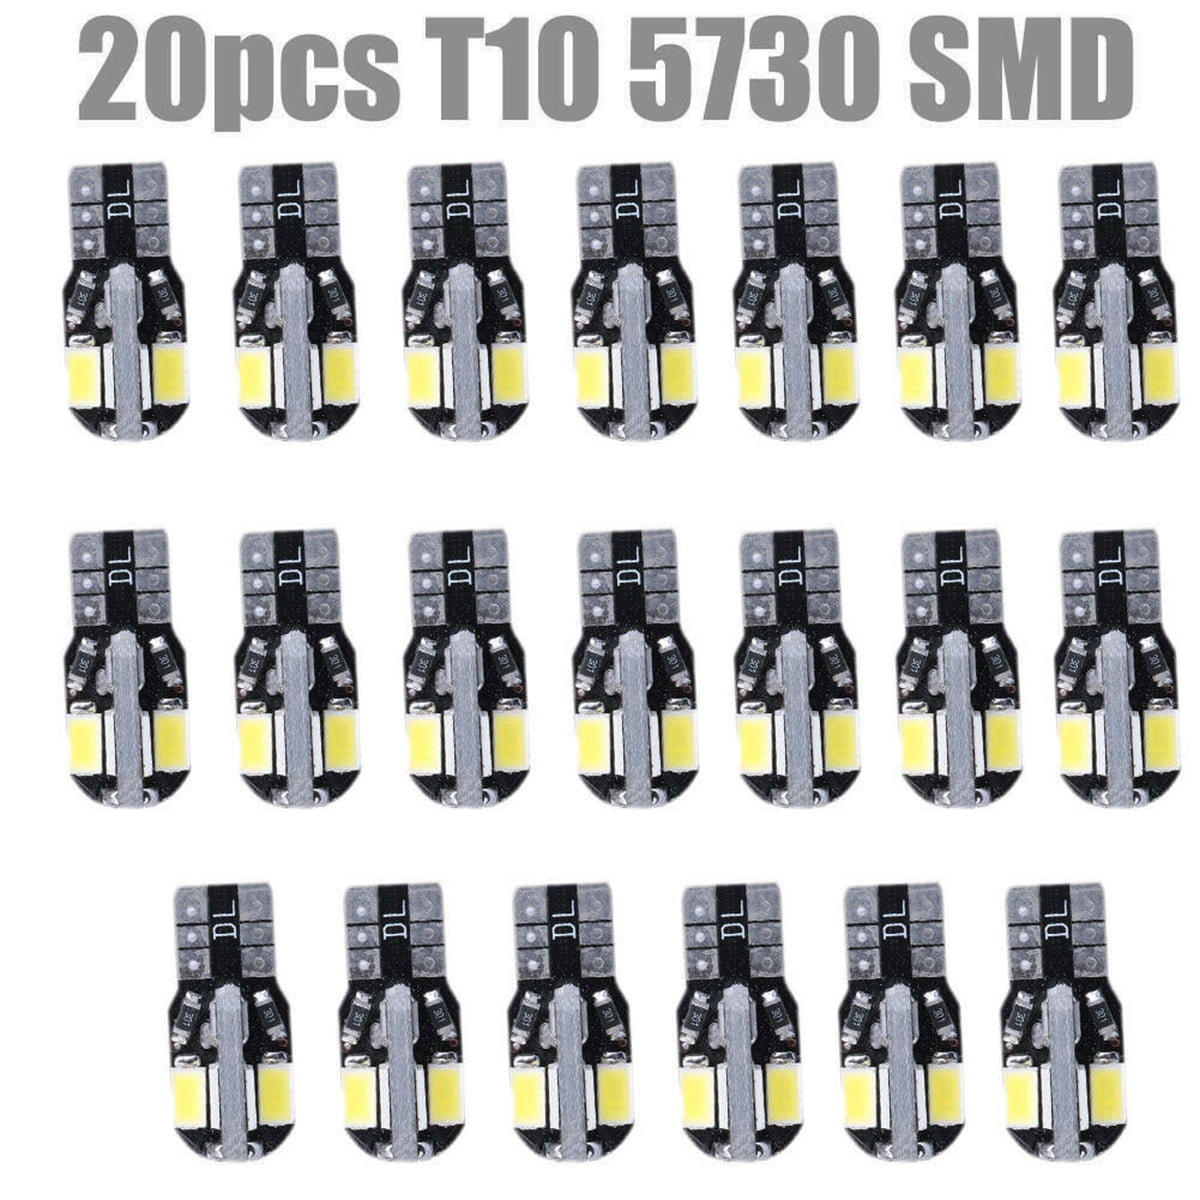 10X outdoor 12V AC/DC LED bulb for all T10 T15 landscape lighting "pure white" 